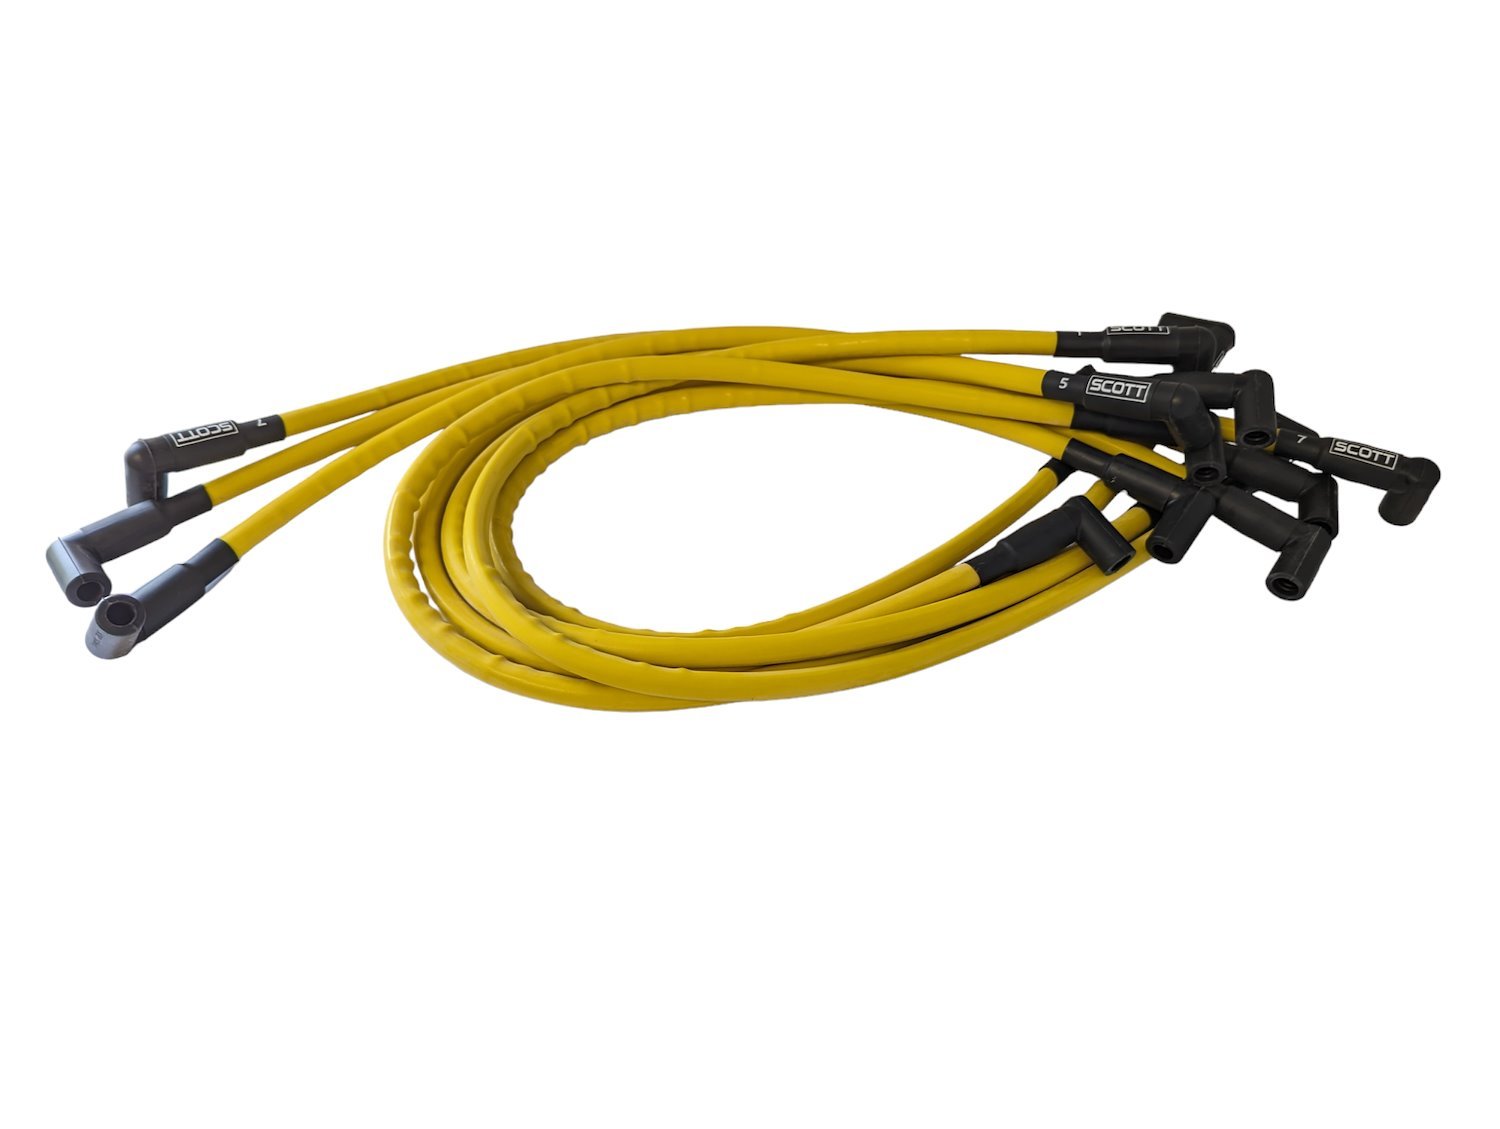 SPW300-CH-437-7 Super Mag Fiberglass-Oversleeved Spark Plug Wire Set for Small Block Chevy, Over & Under [Yellow]